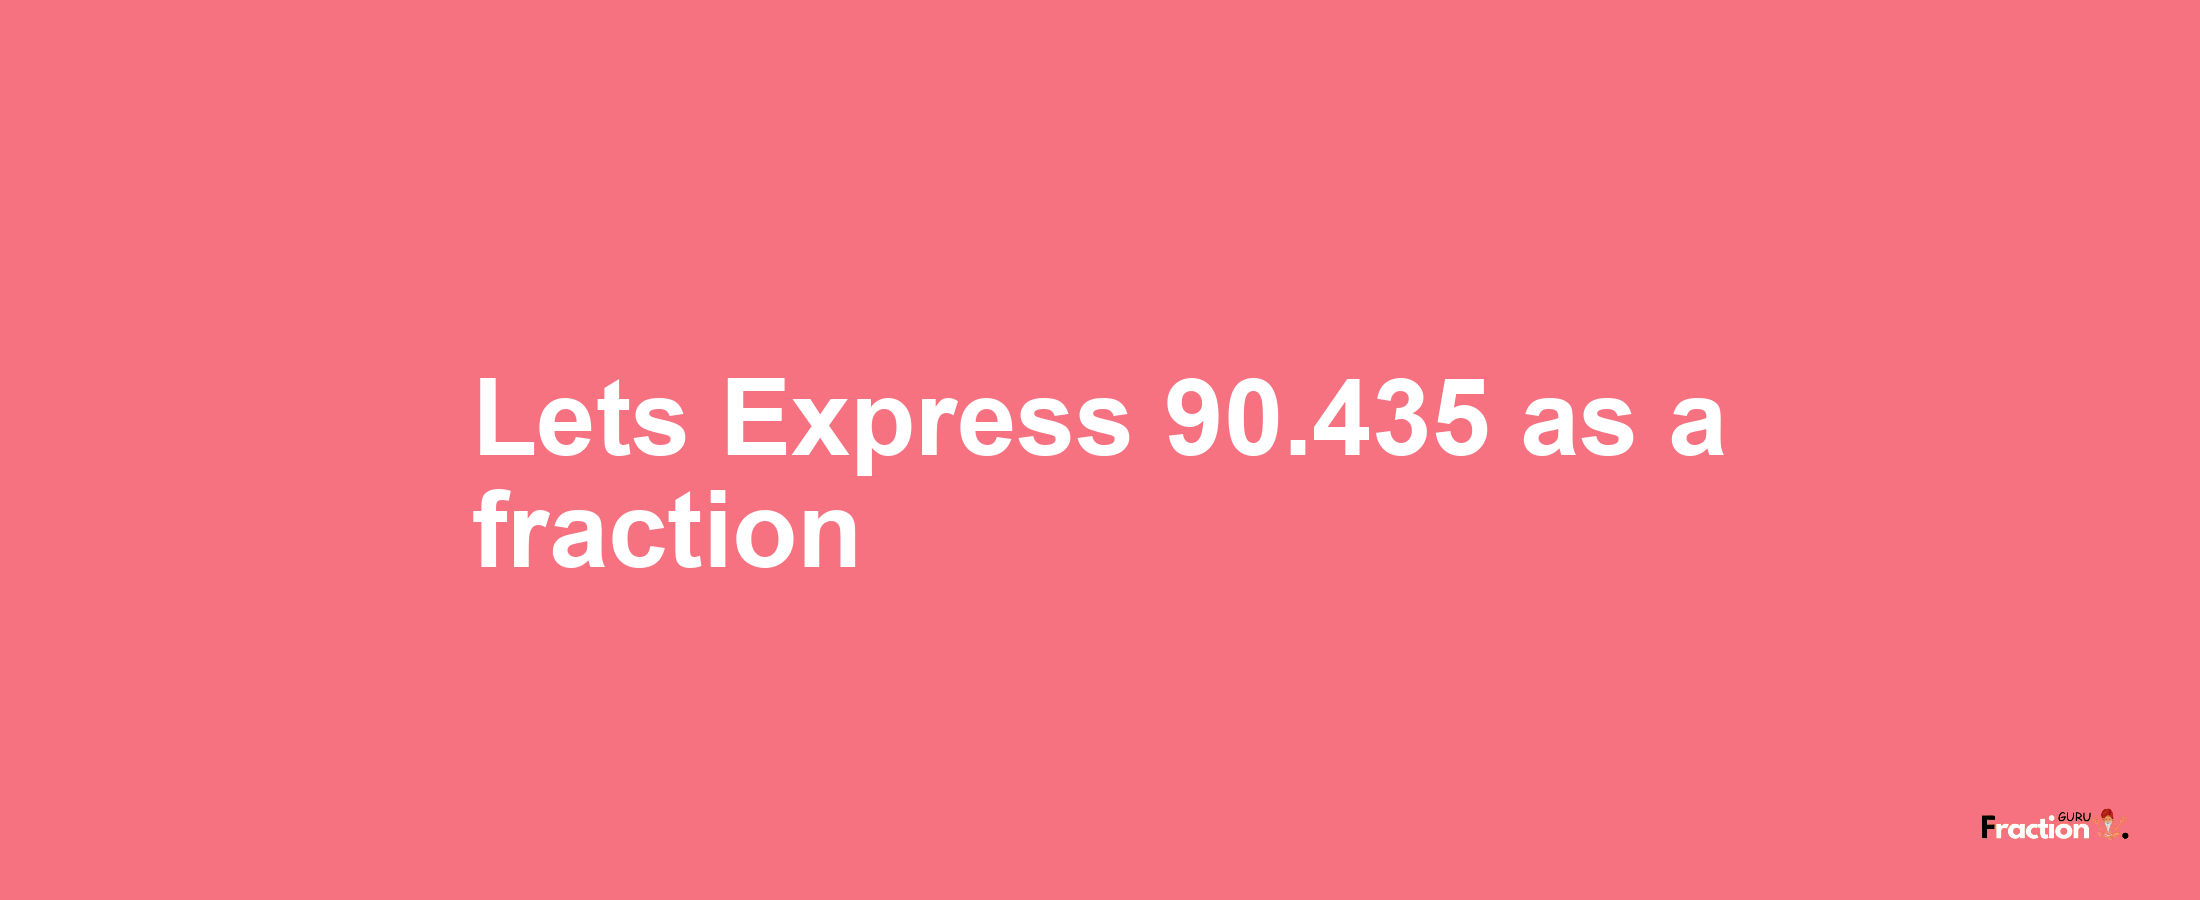 Lets Express 90.435 as afraction